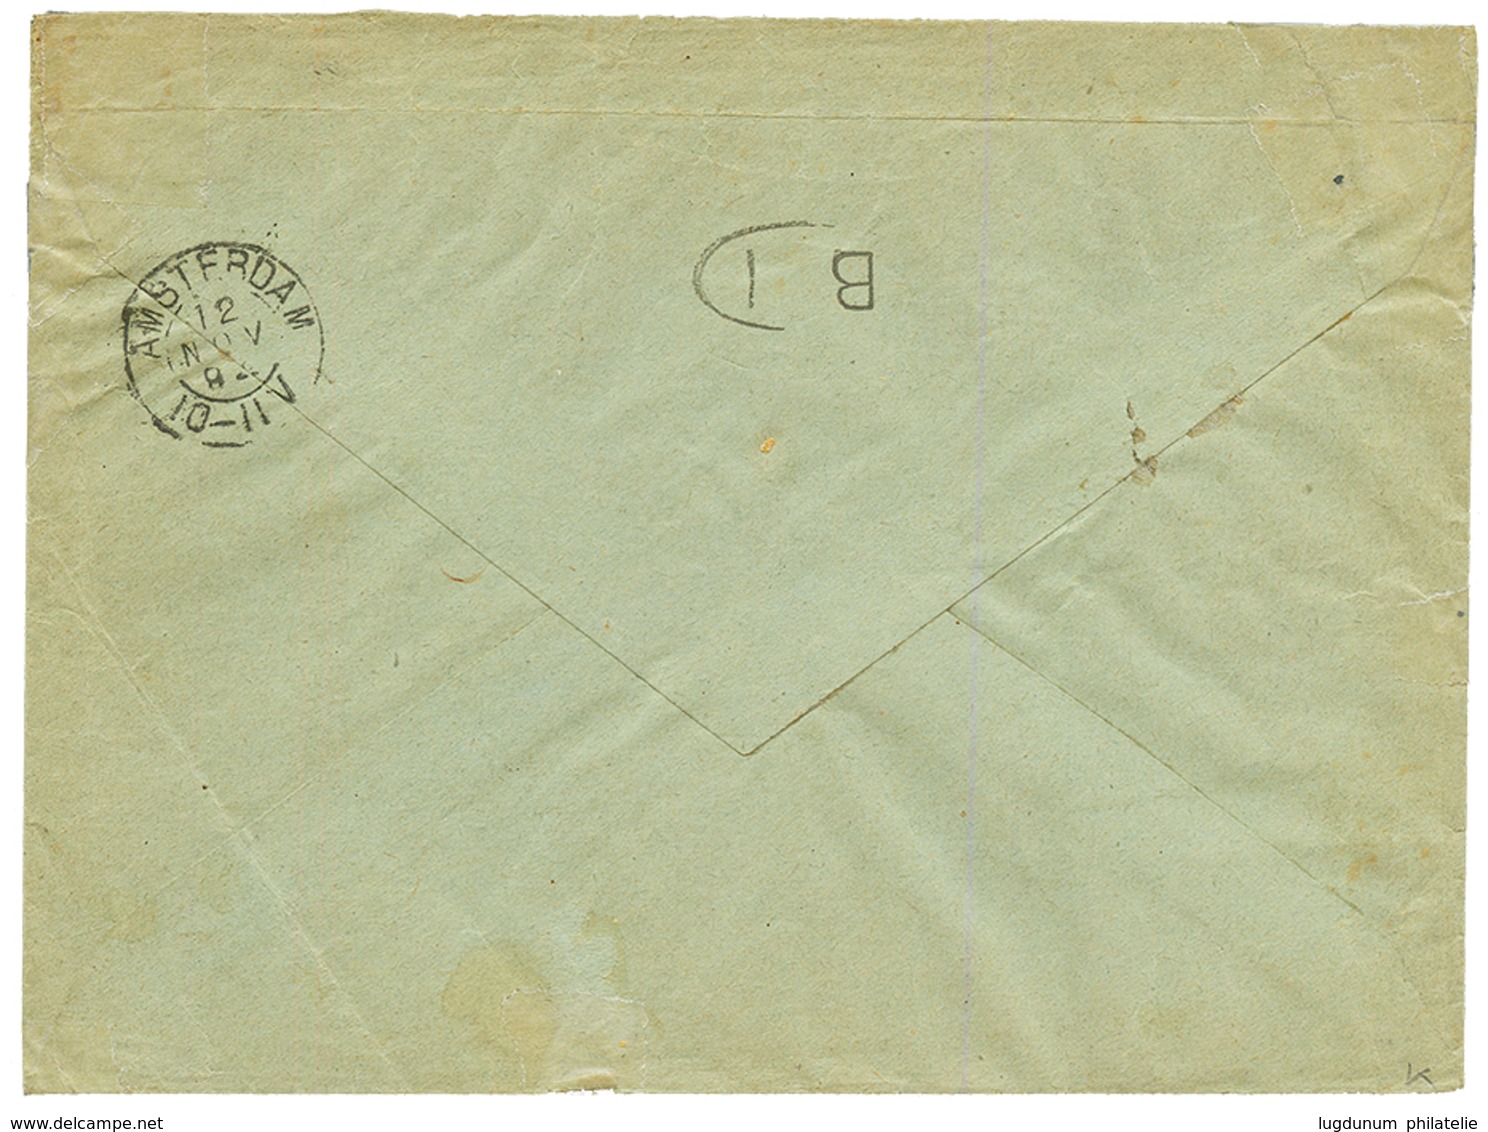 SURINAME : 1894 1cx3(1 Stamp With Fault) + 12 1/2c + 5c Unperf (!) Canc. NEDERL. PAKETBOOT On Cover To AMLSTERDAM. Vf. - Surinam ... - 1975